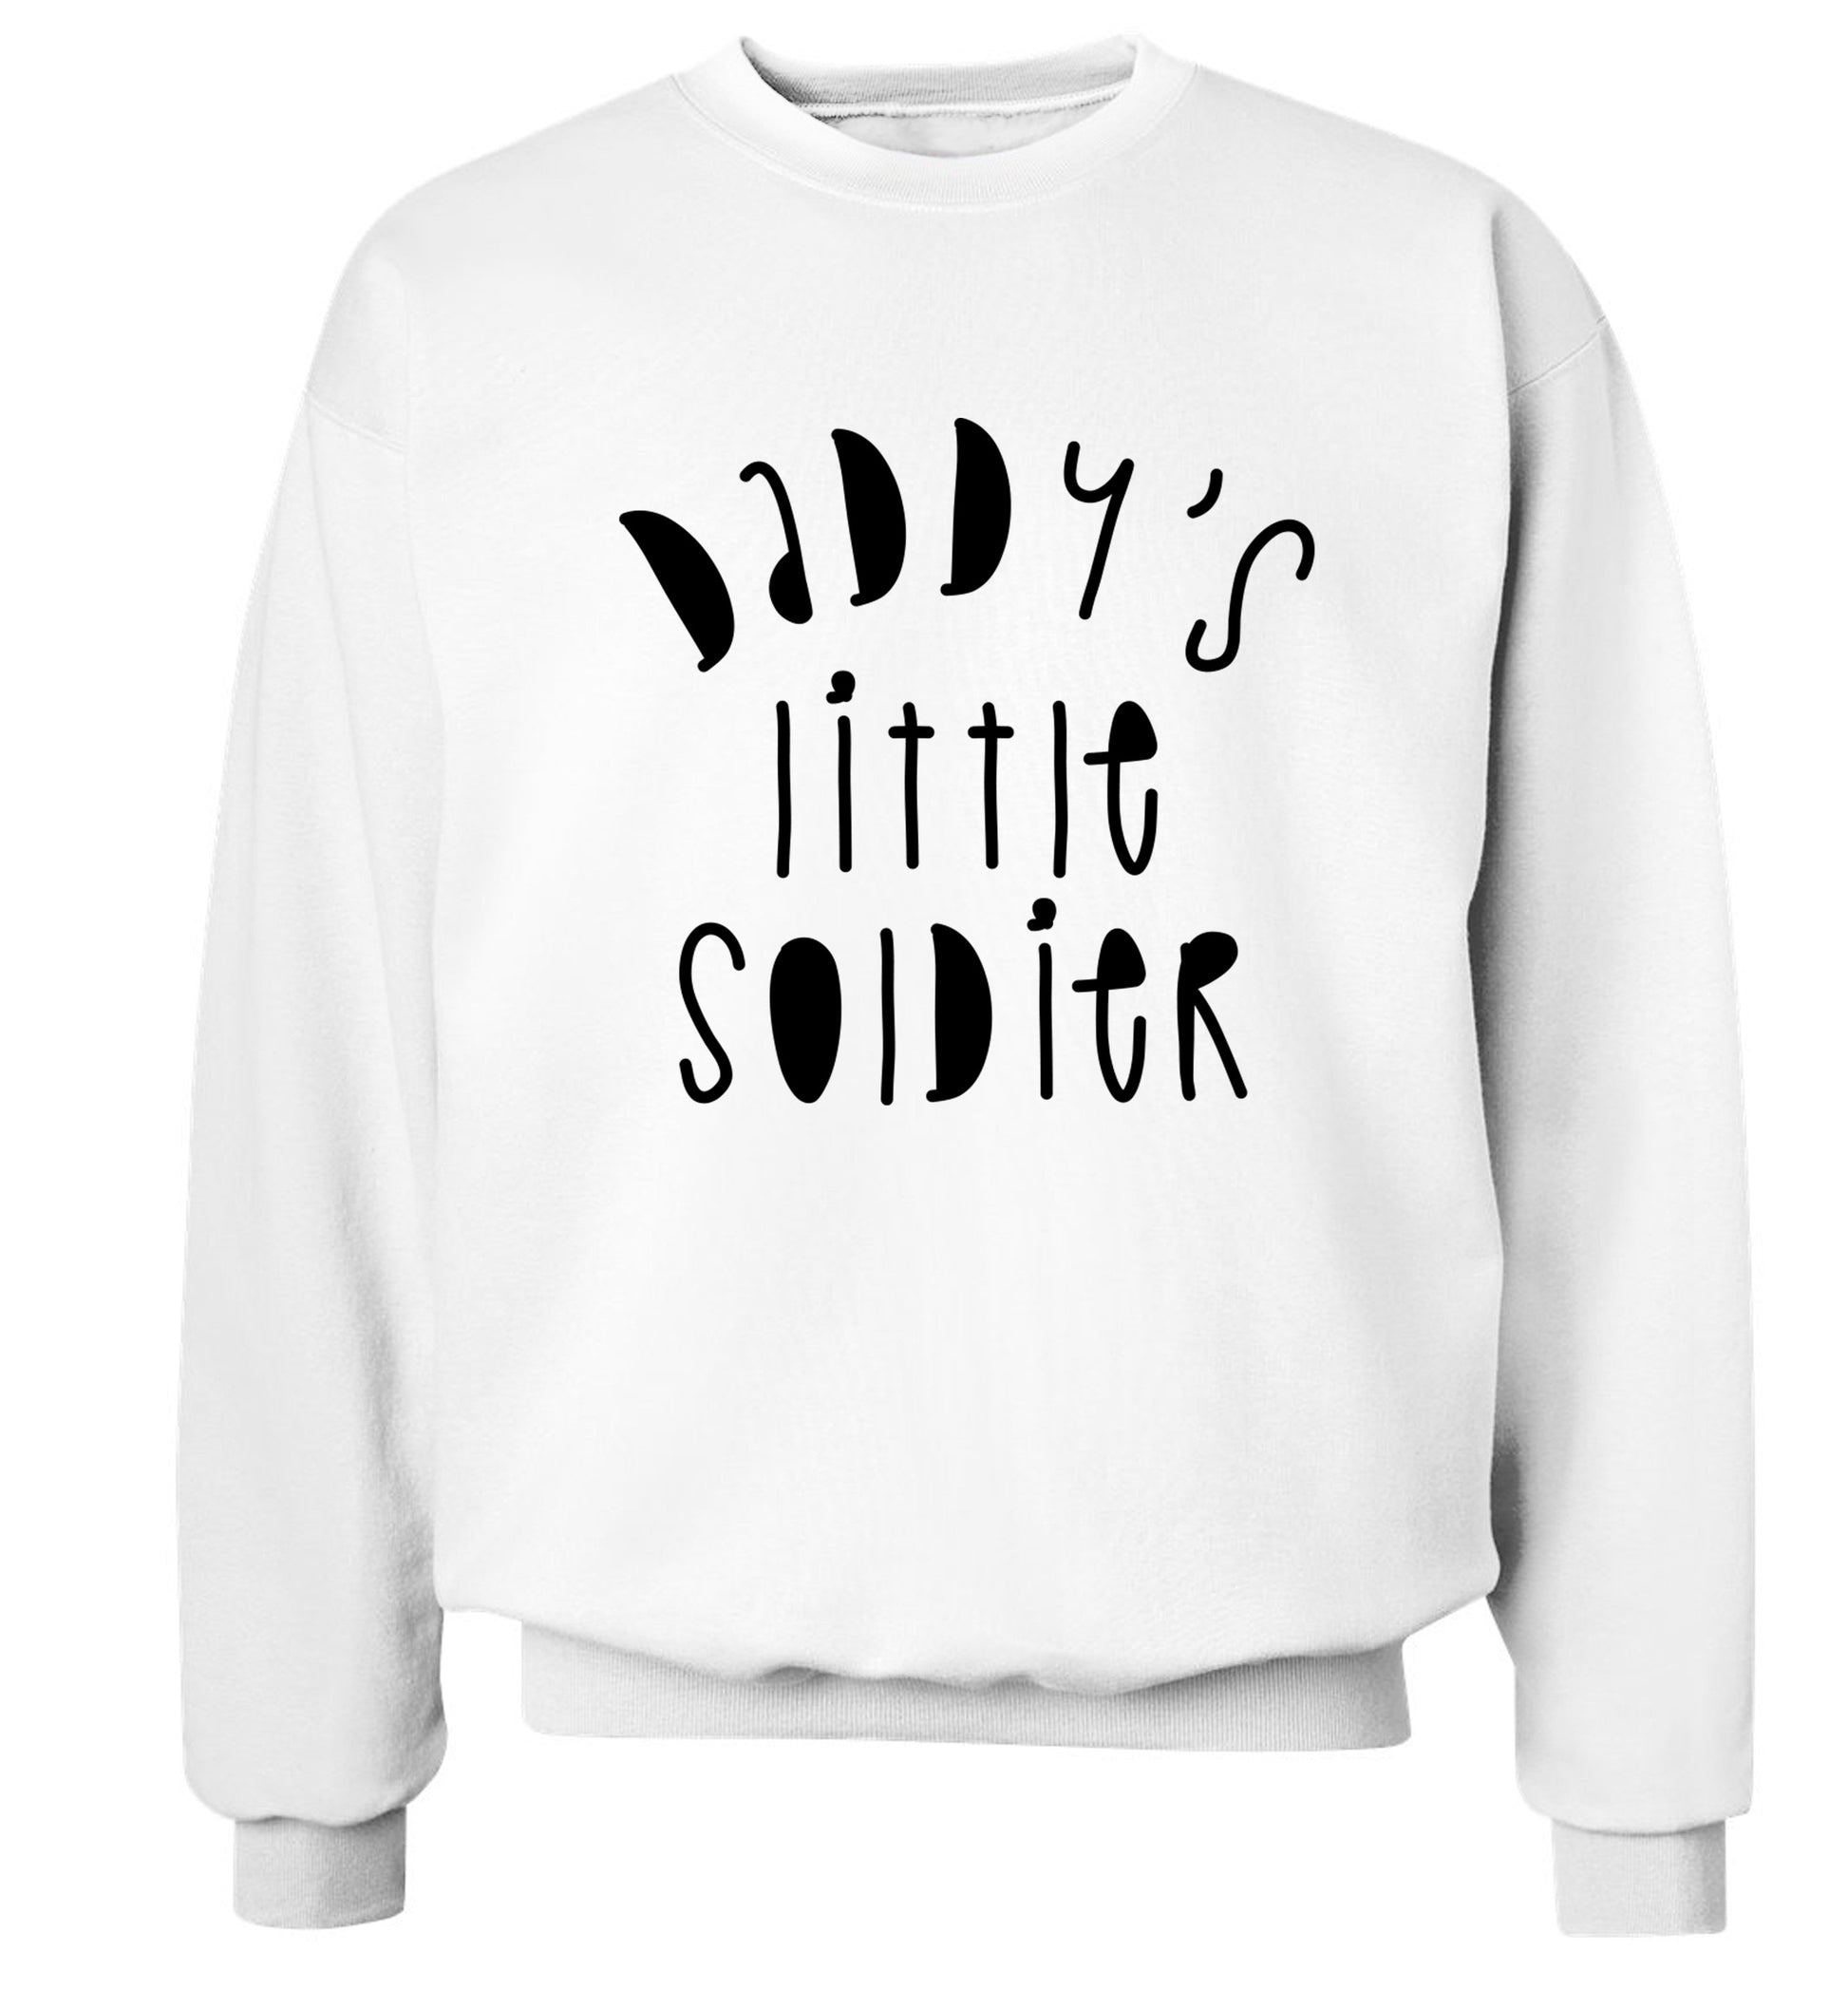 Daddy's little soldier Adult's unisex white Sweater 2XL